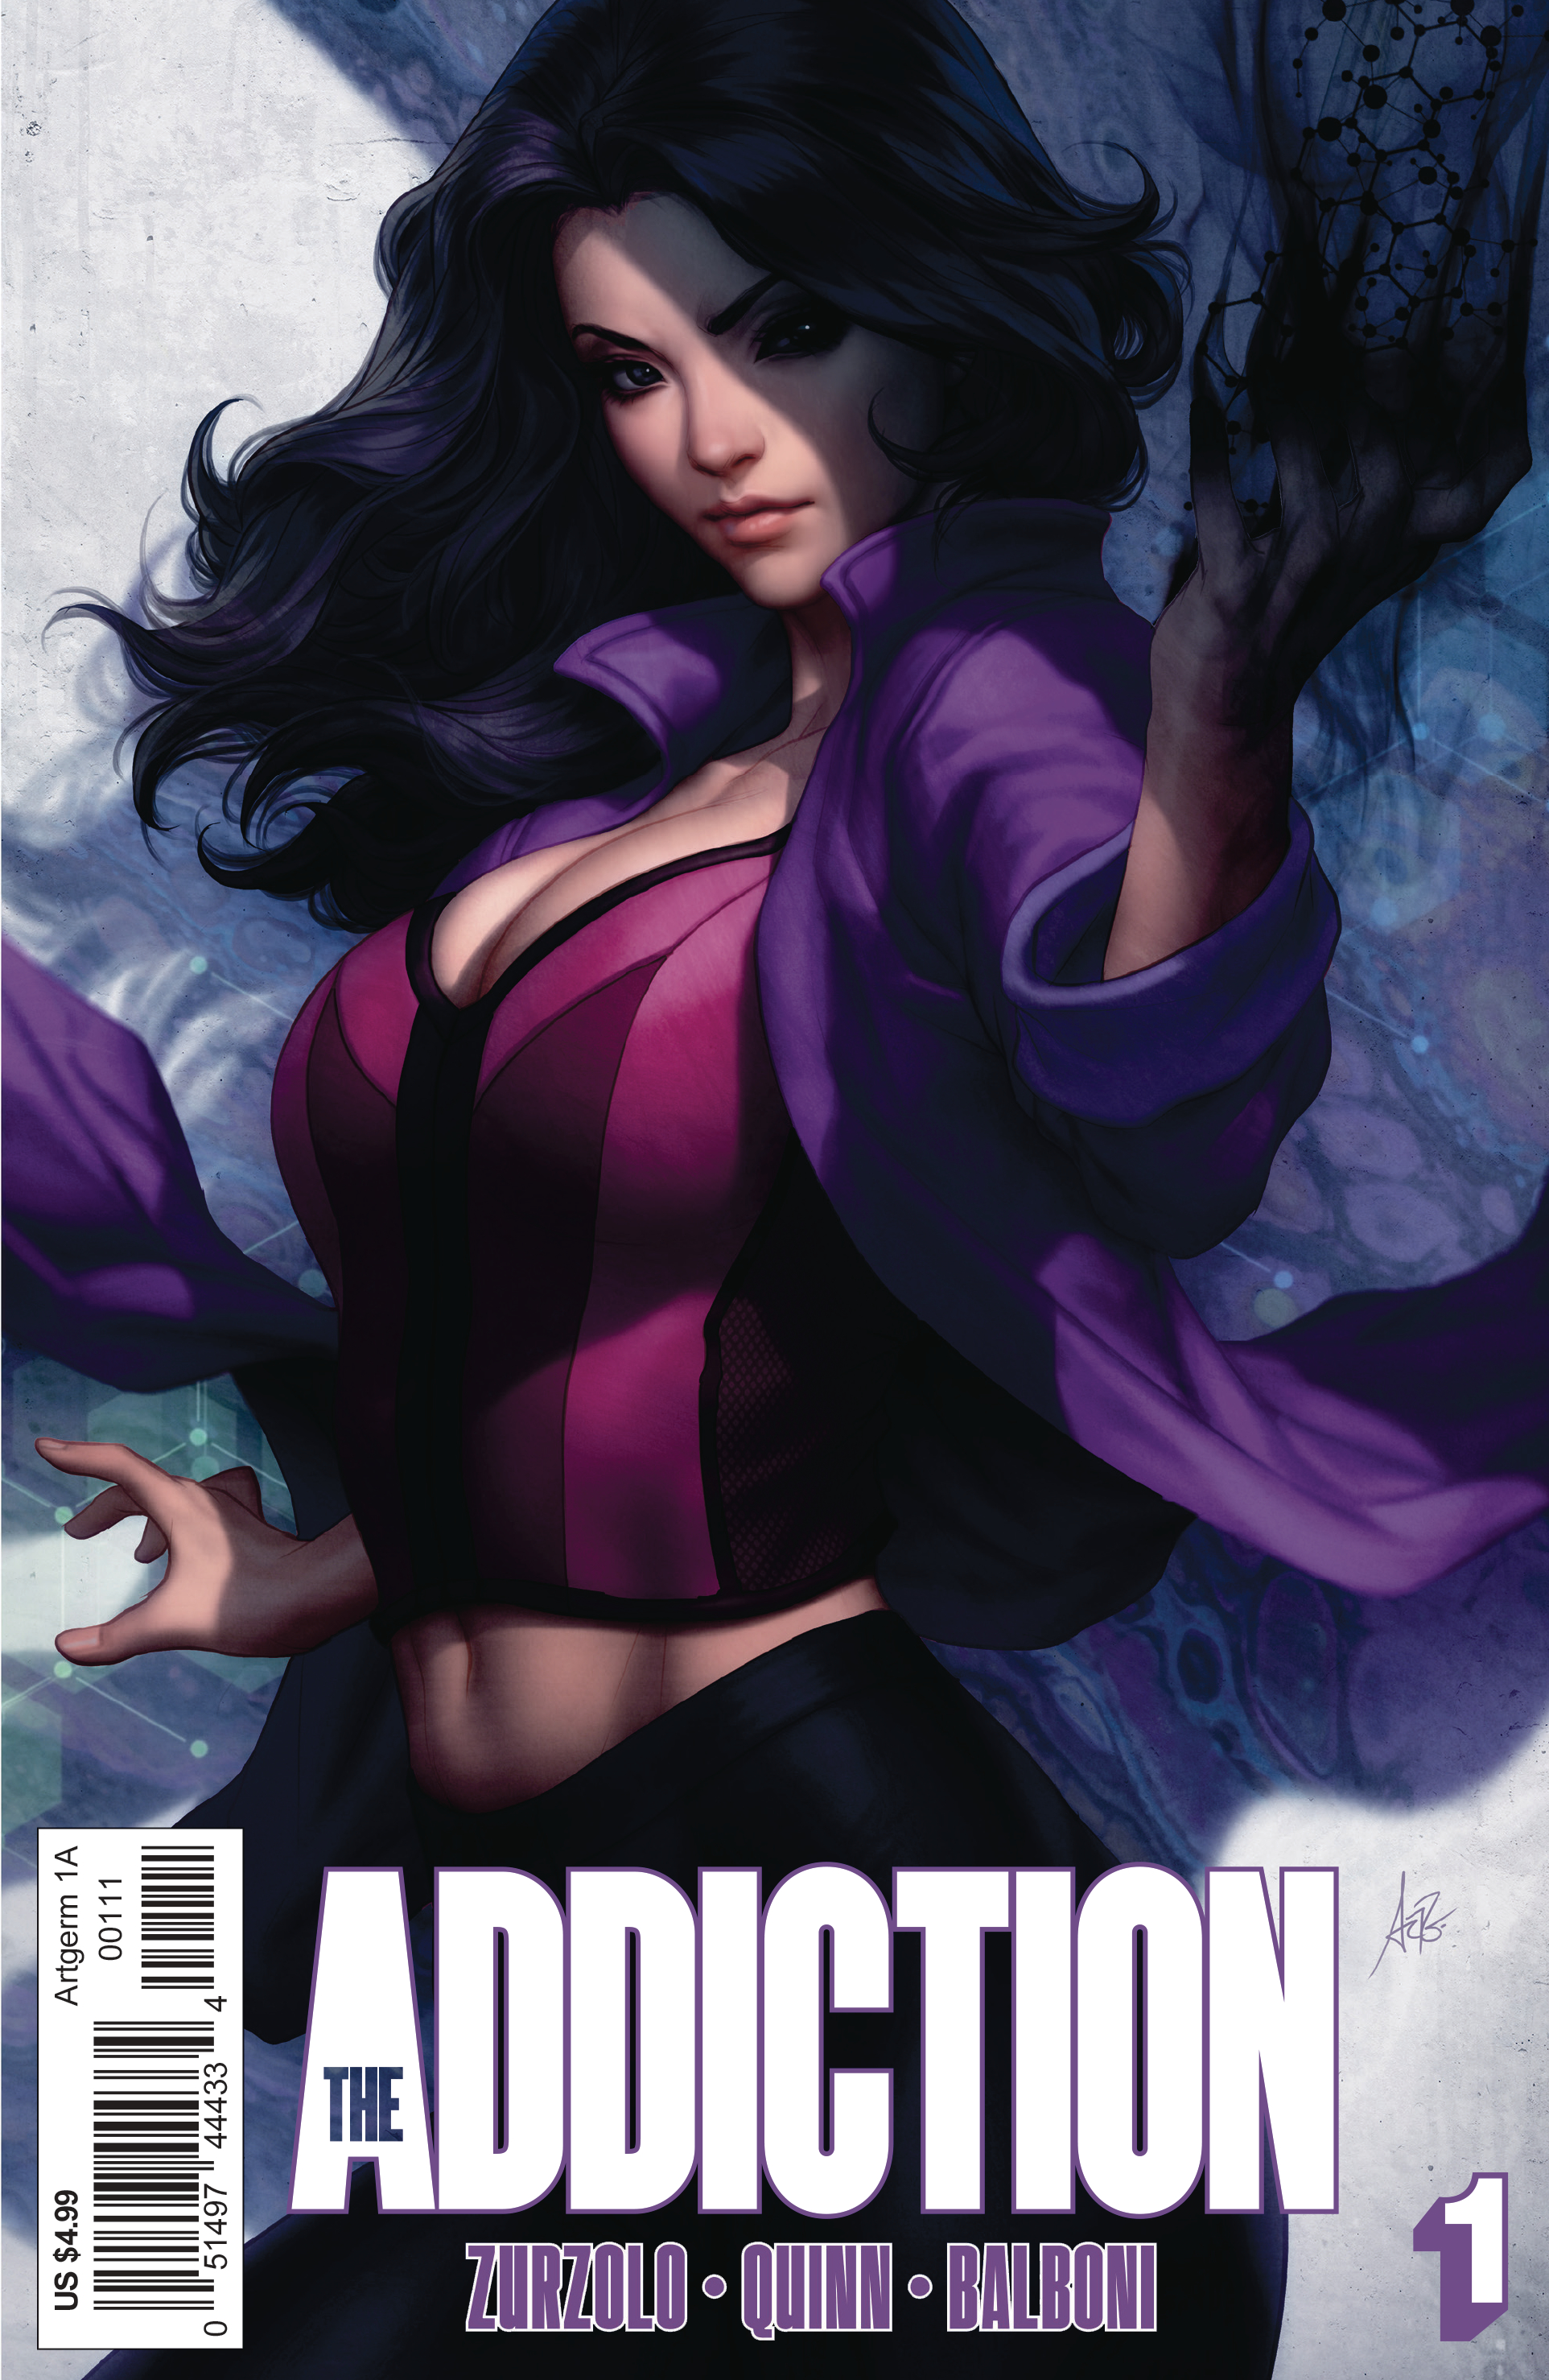 Addiction Death of Your Life #1 Cover A Artgerm (Of 3)